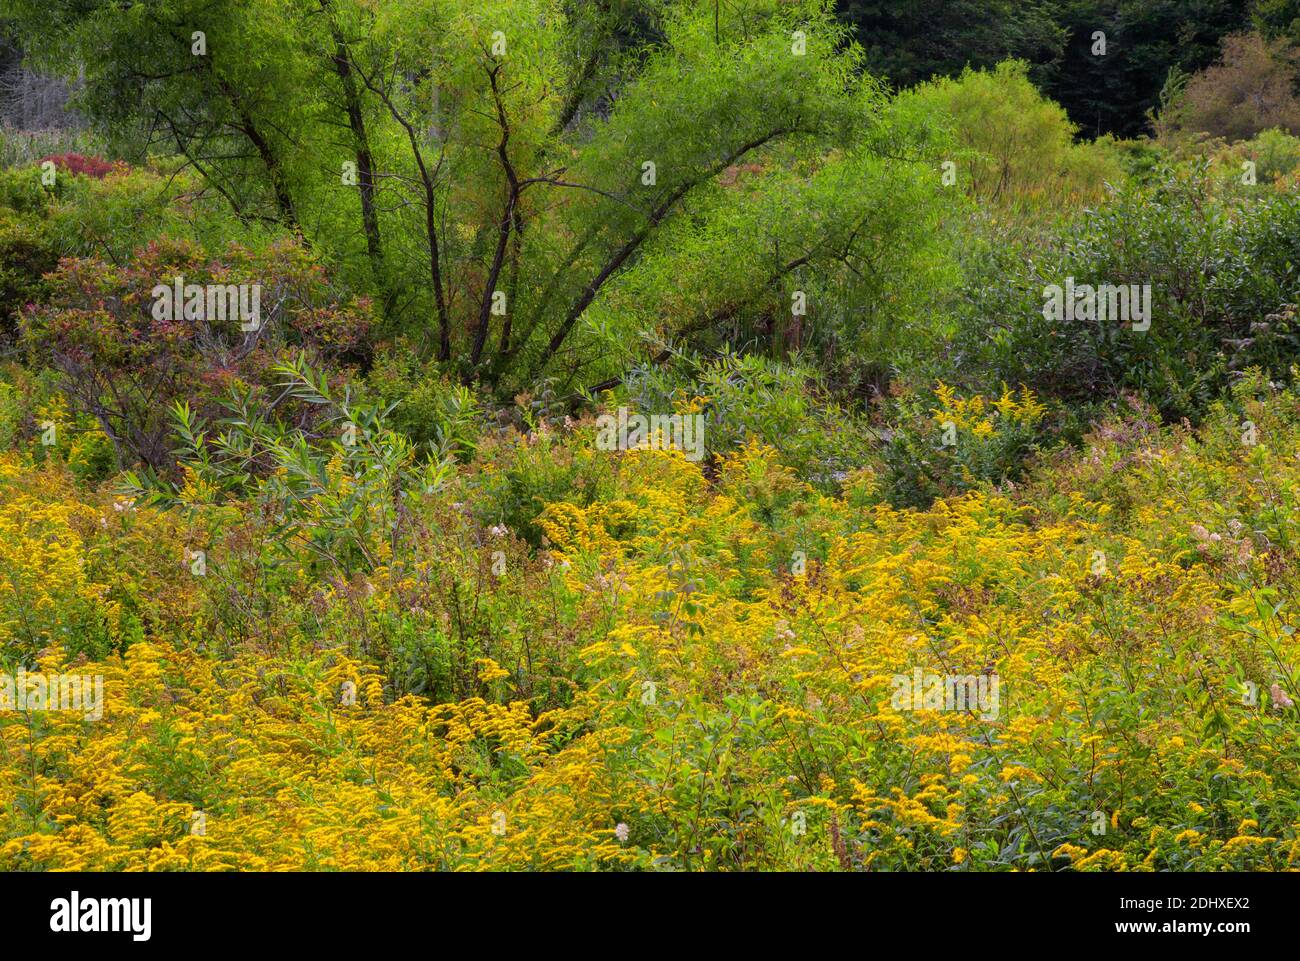 At the edge of a wetland and upland meadow a thicket has developed providing wildlife habitat in Pennsylvania’s Pocono Mountans. Stock Photo